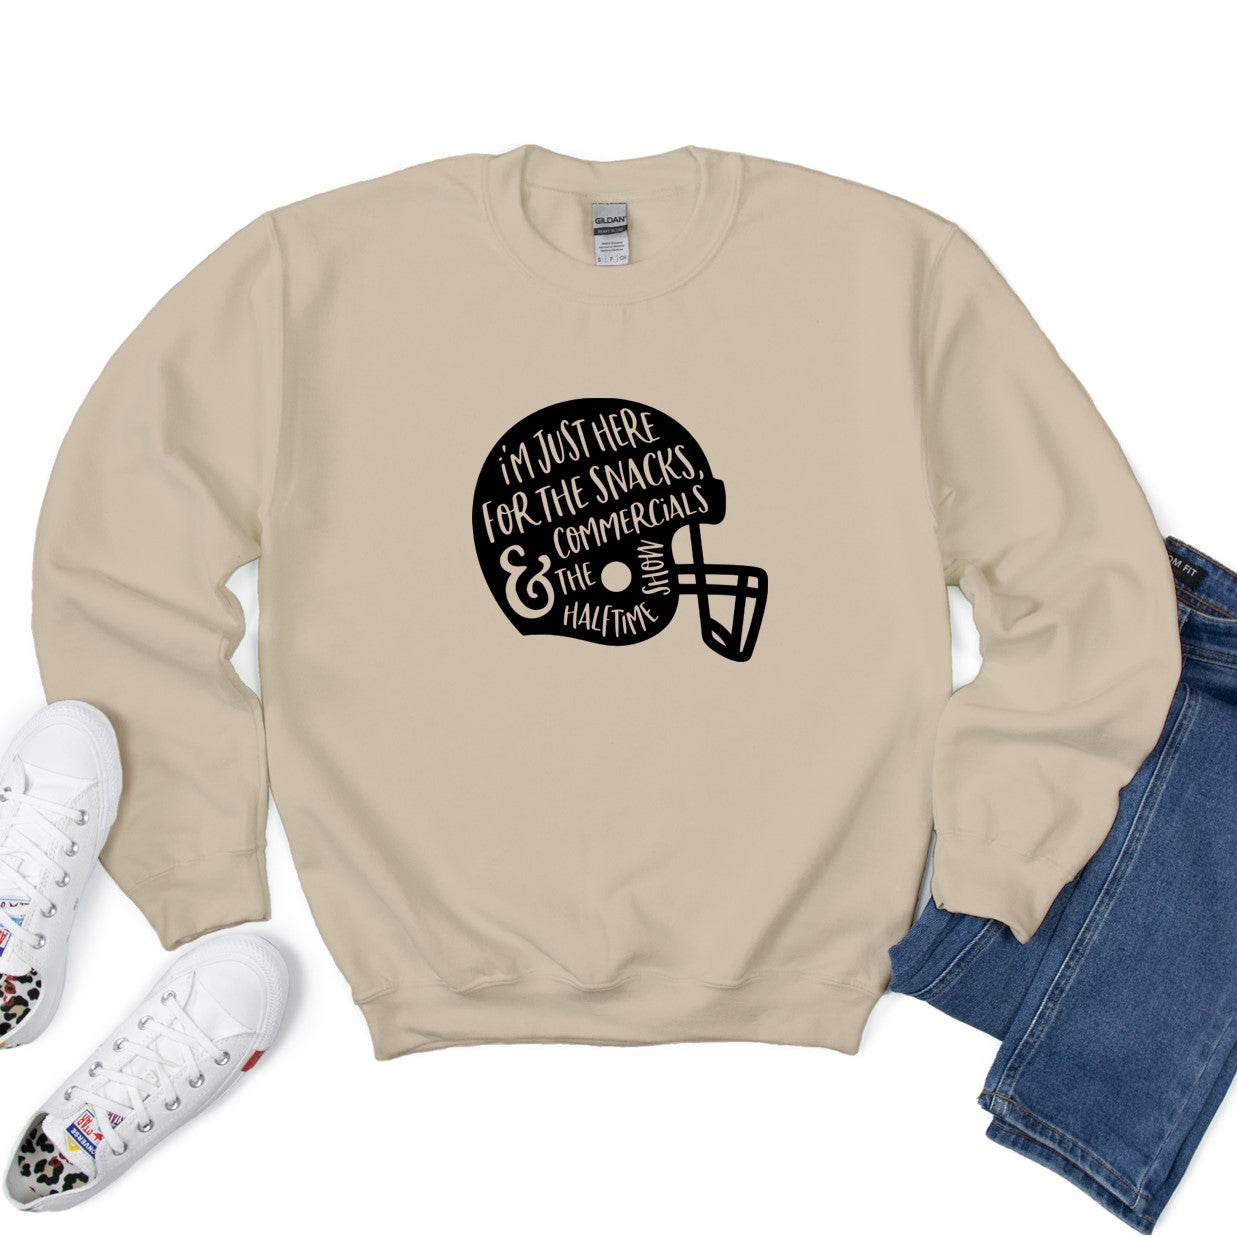 I'm just here for the snacks, commercials and halftime show - tee or sweatshirt